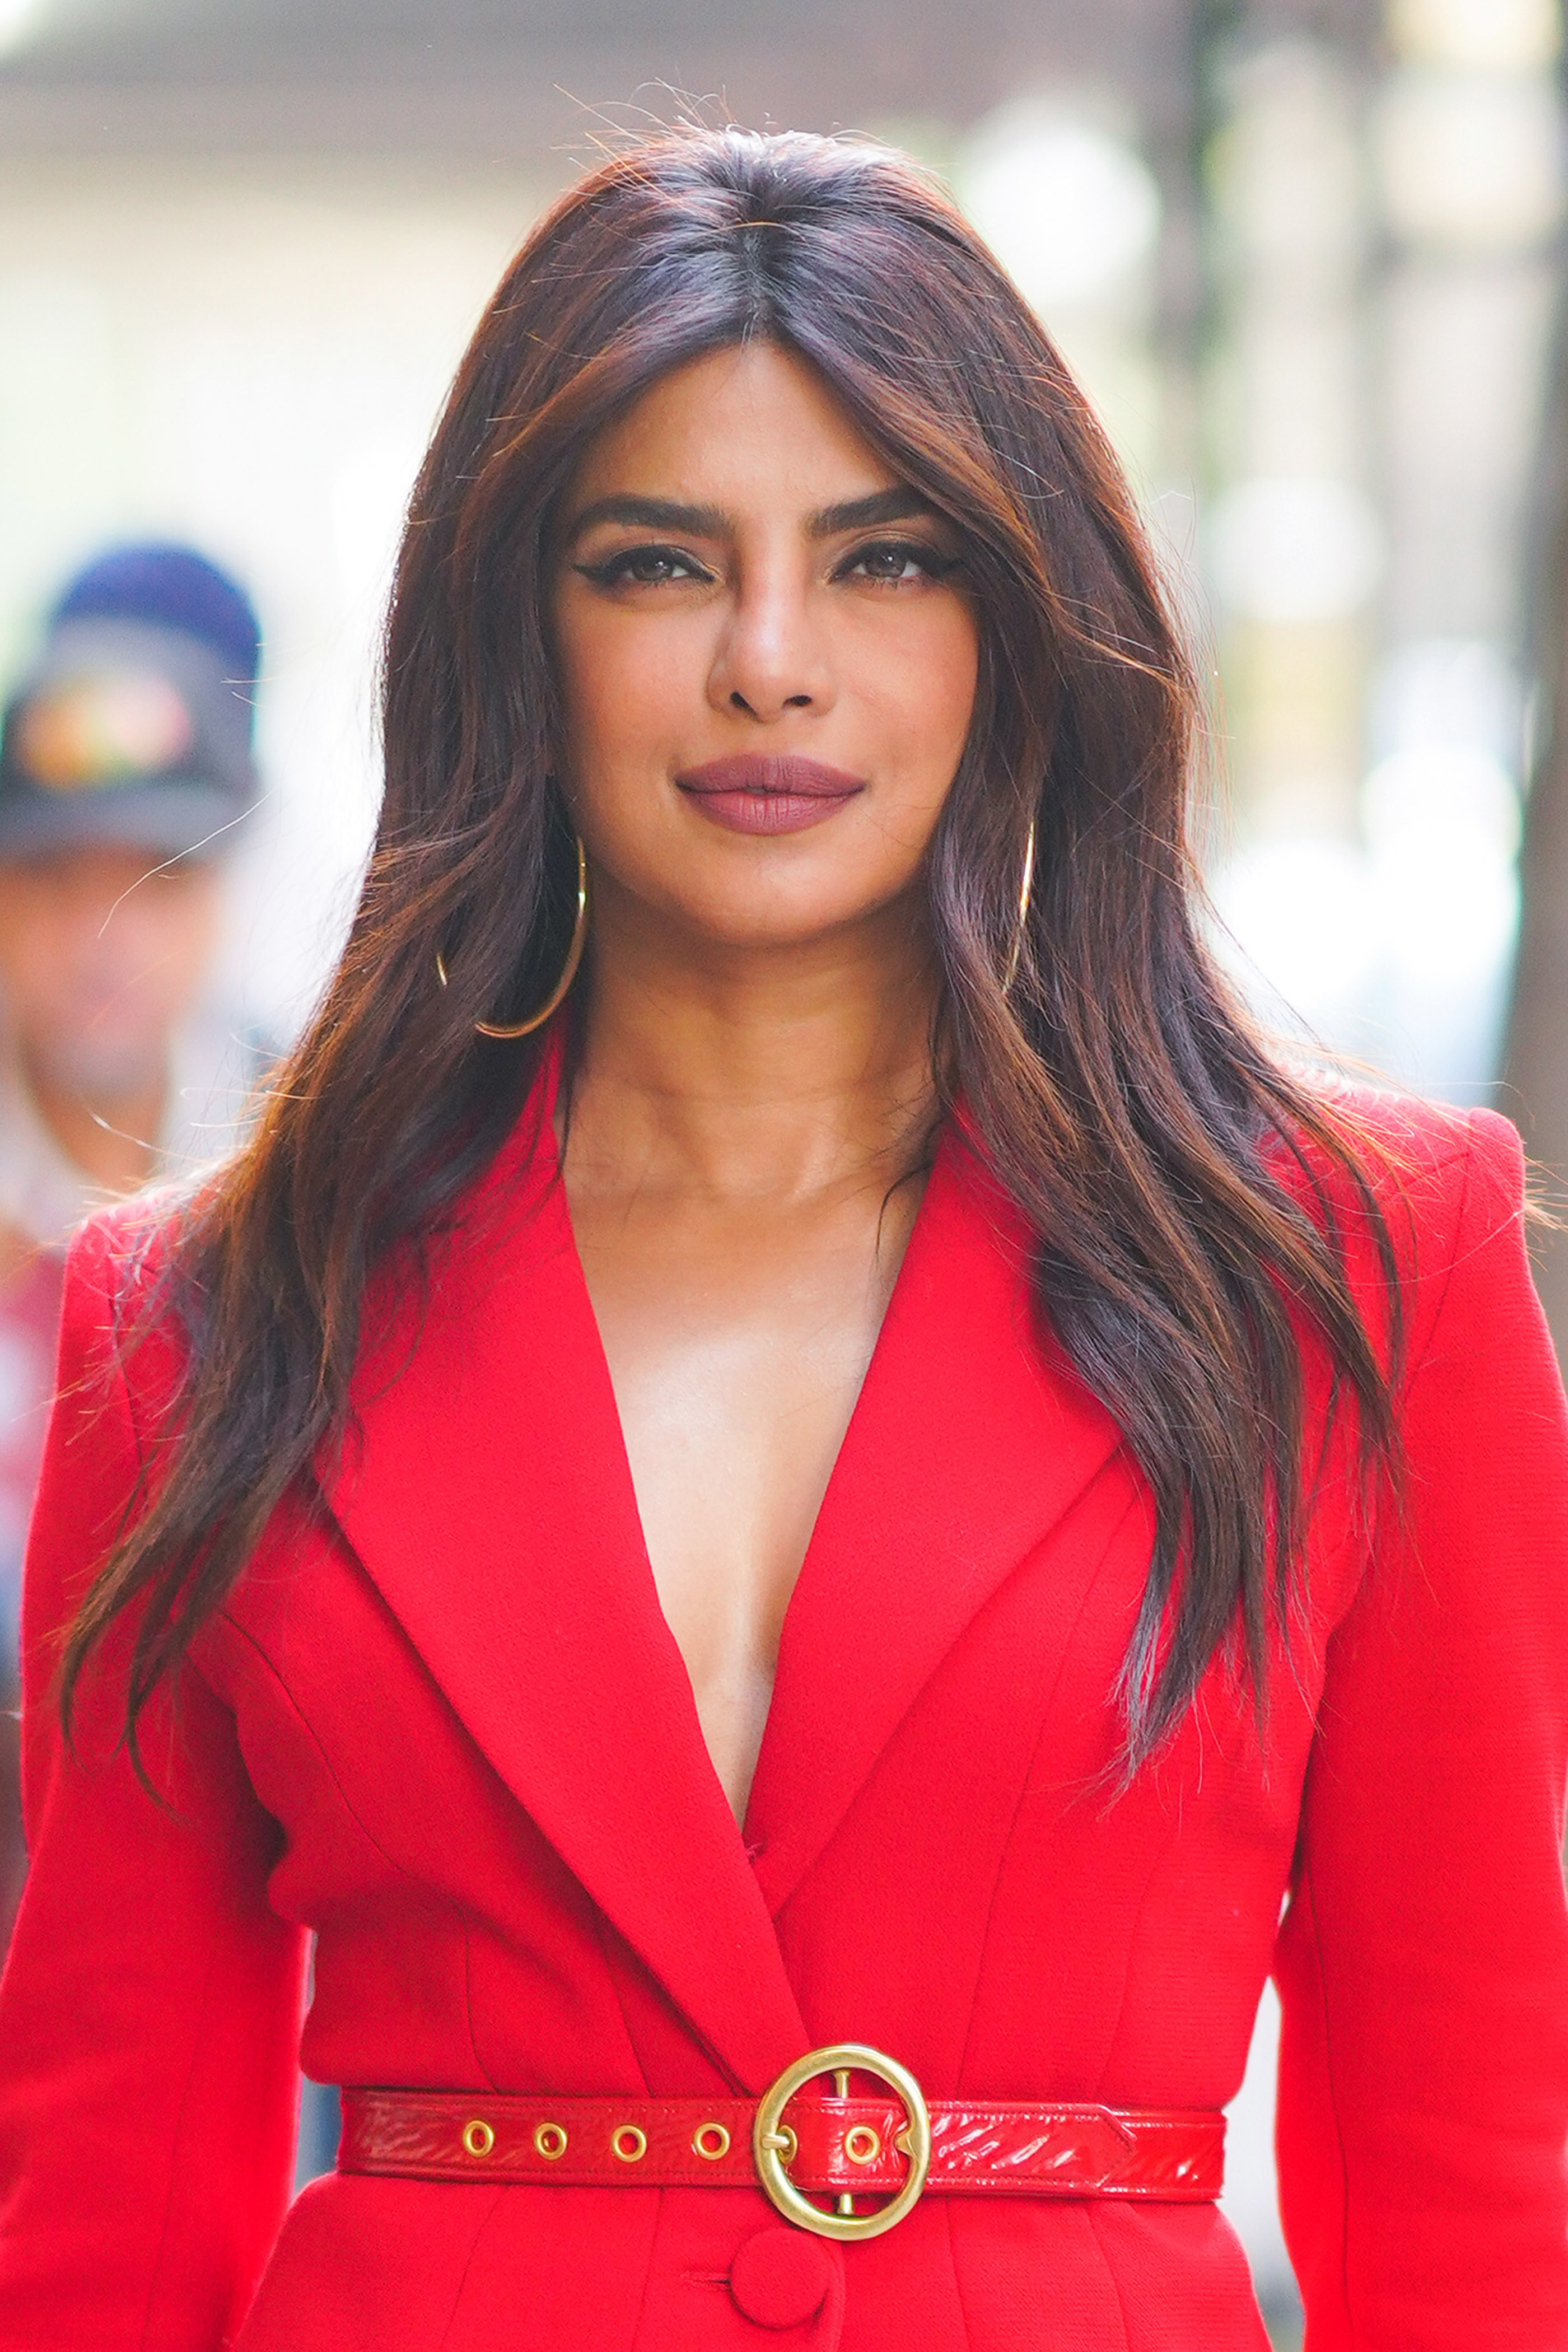 Priyanka Chopra pictured in a red pantsuit on December 16, 2021 in New York City